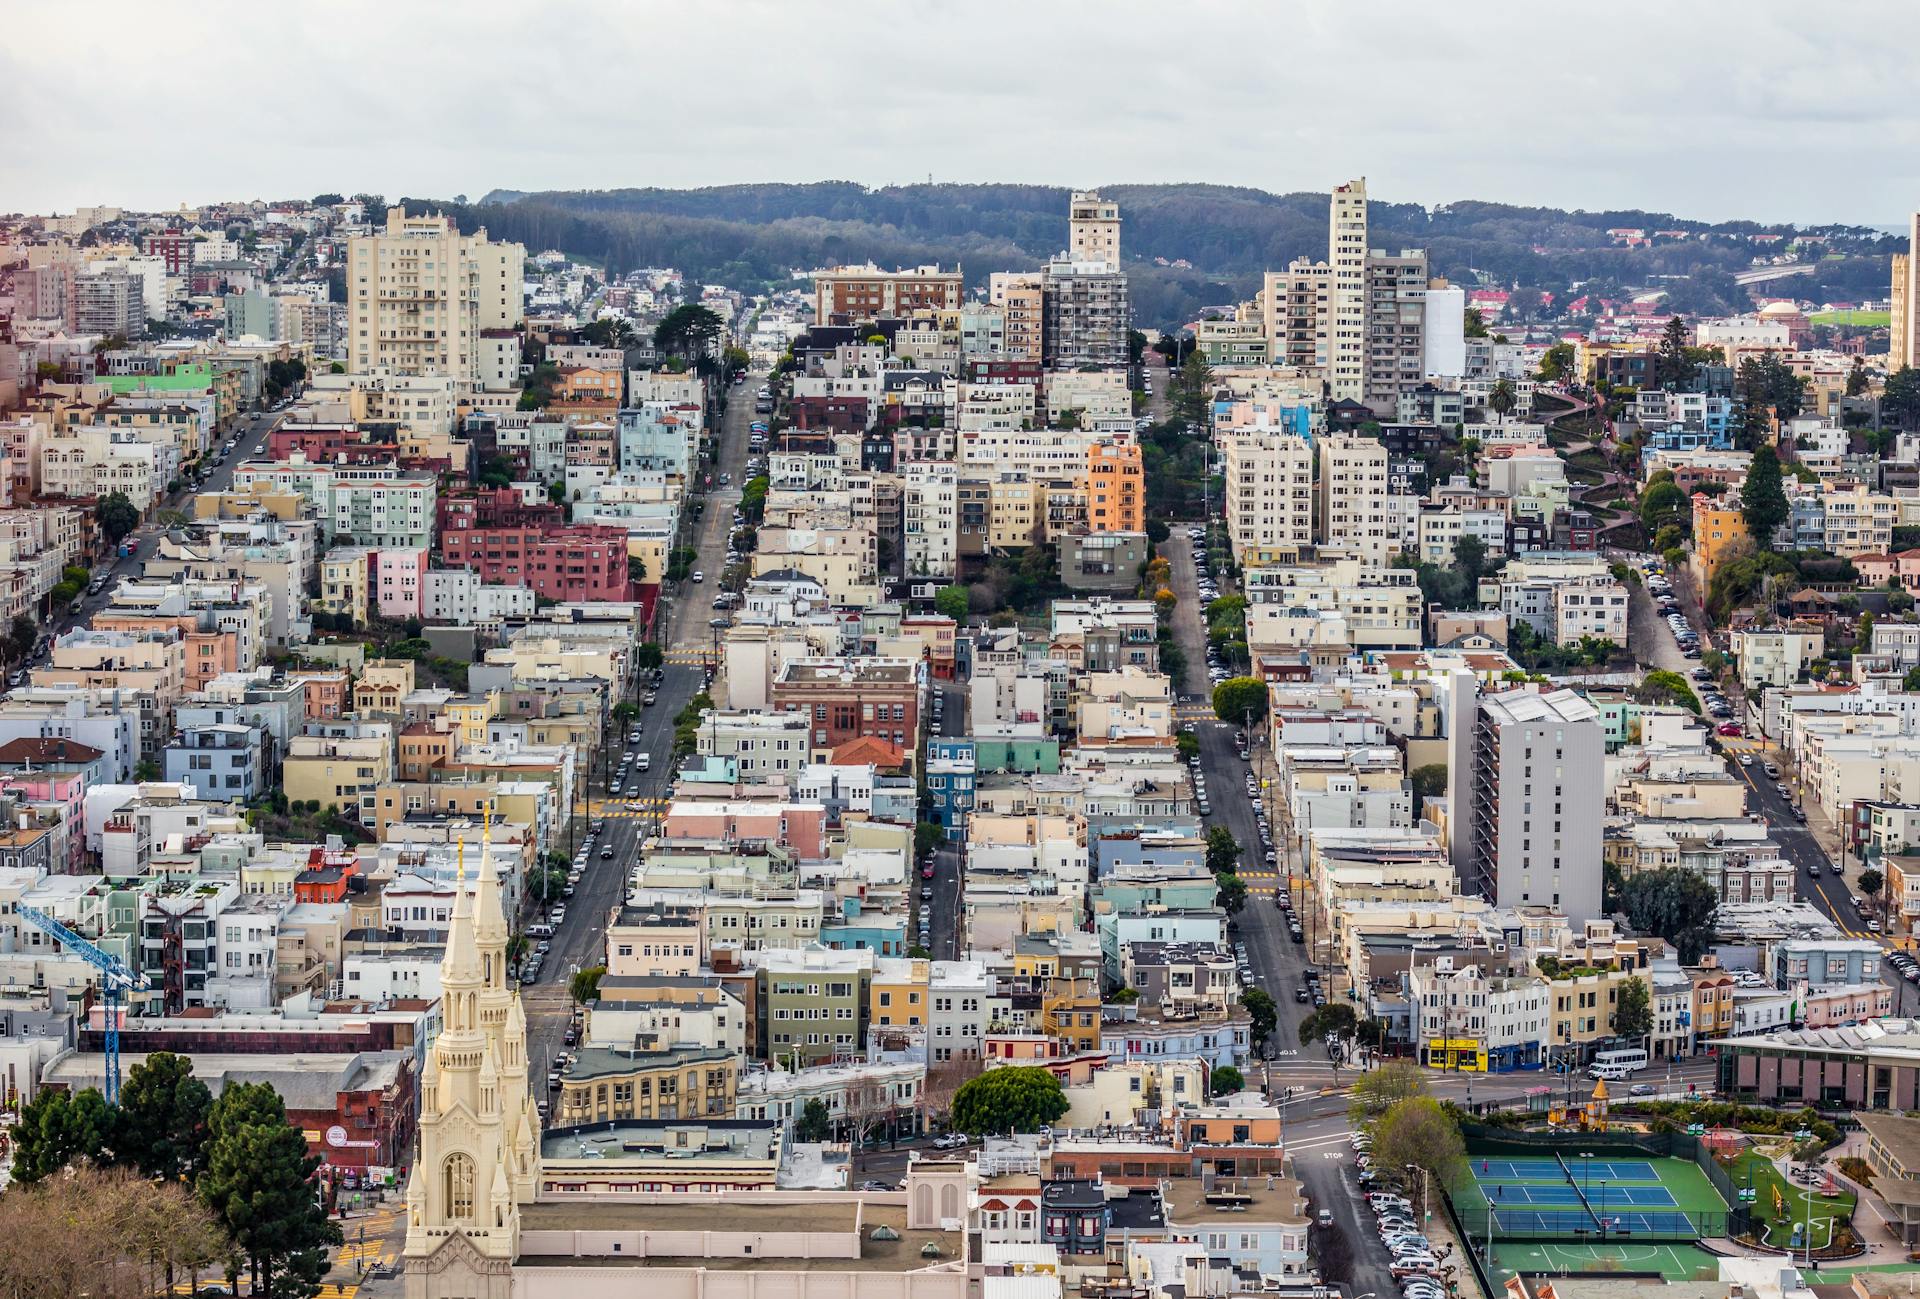 Image of the beautiful city of South San Francisco